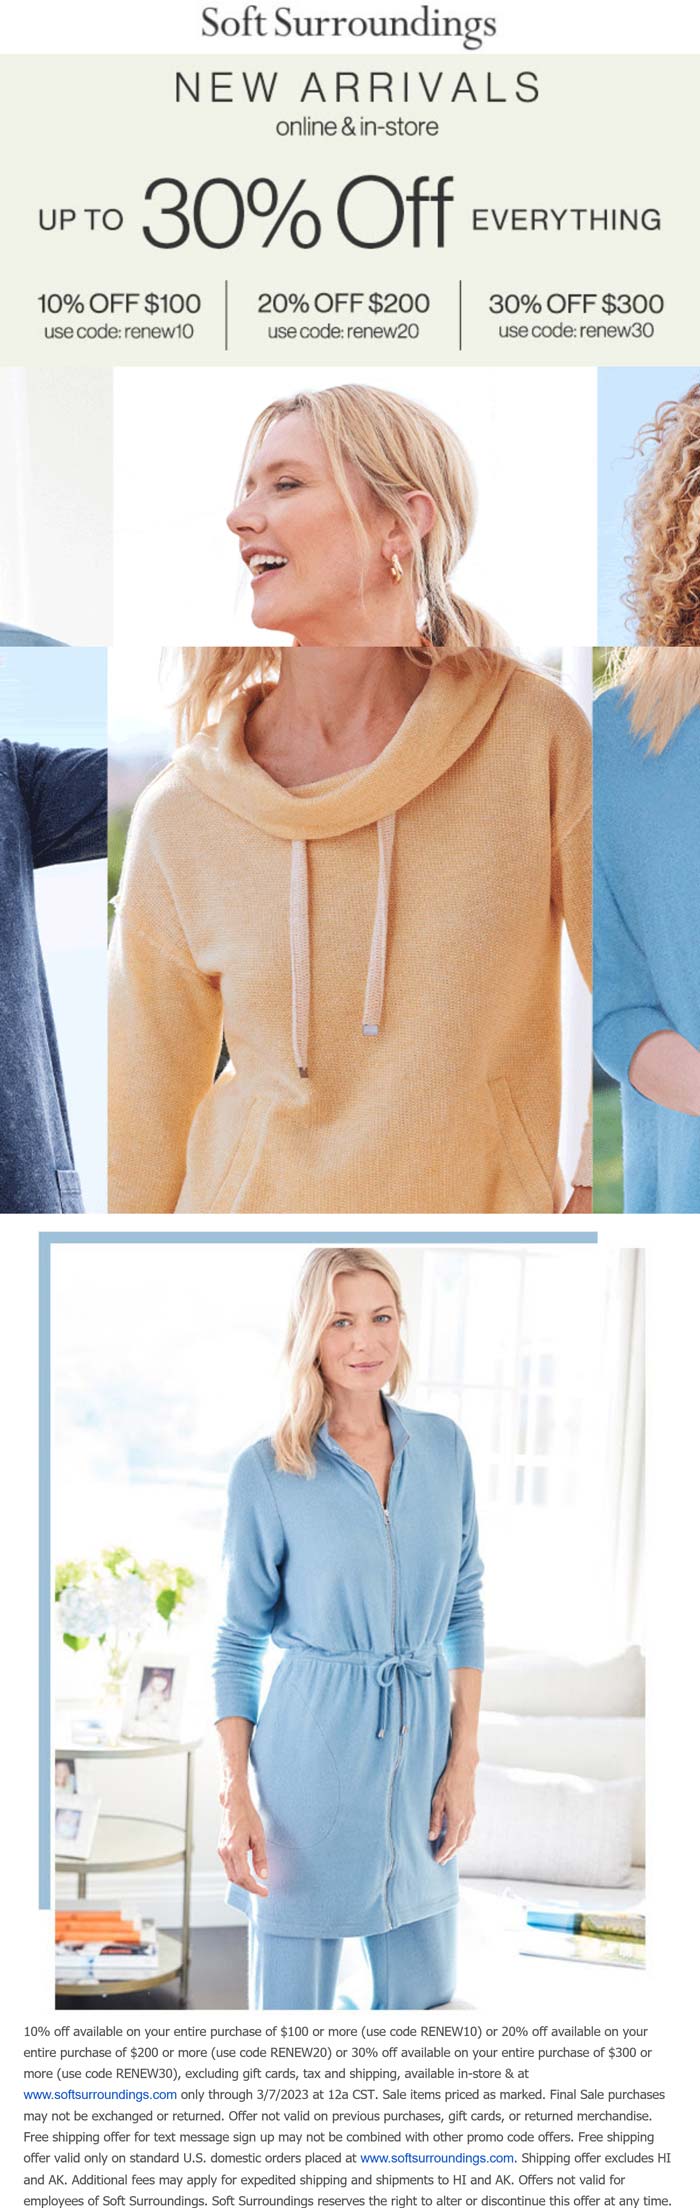 Soft Surroundings stores Coupon  10-30% off $100+ at Soft Surroundings, or online via promo code RENEW10 #softsurroundings 